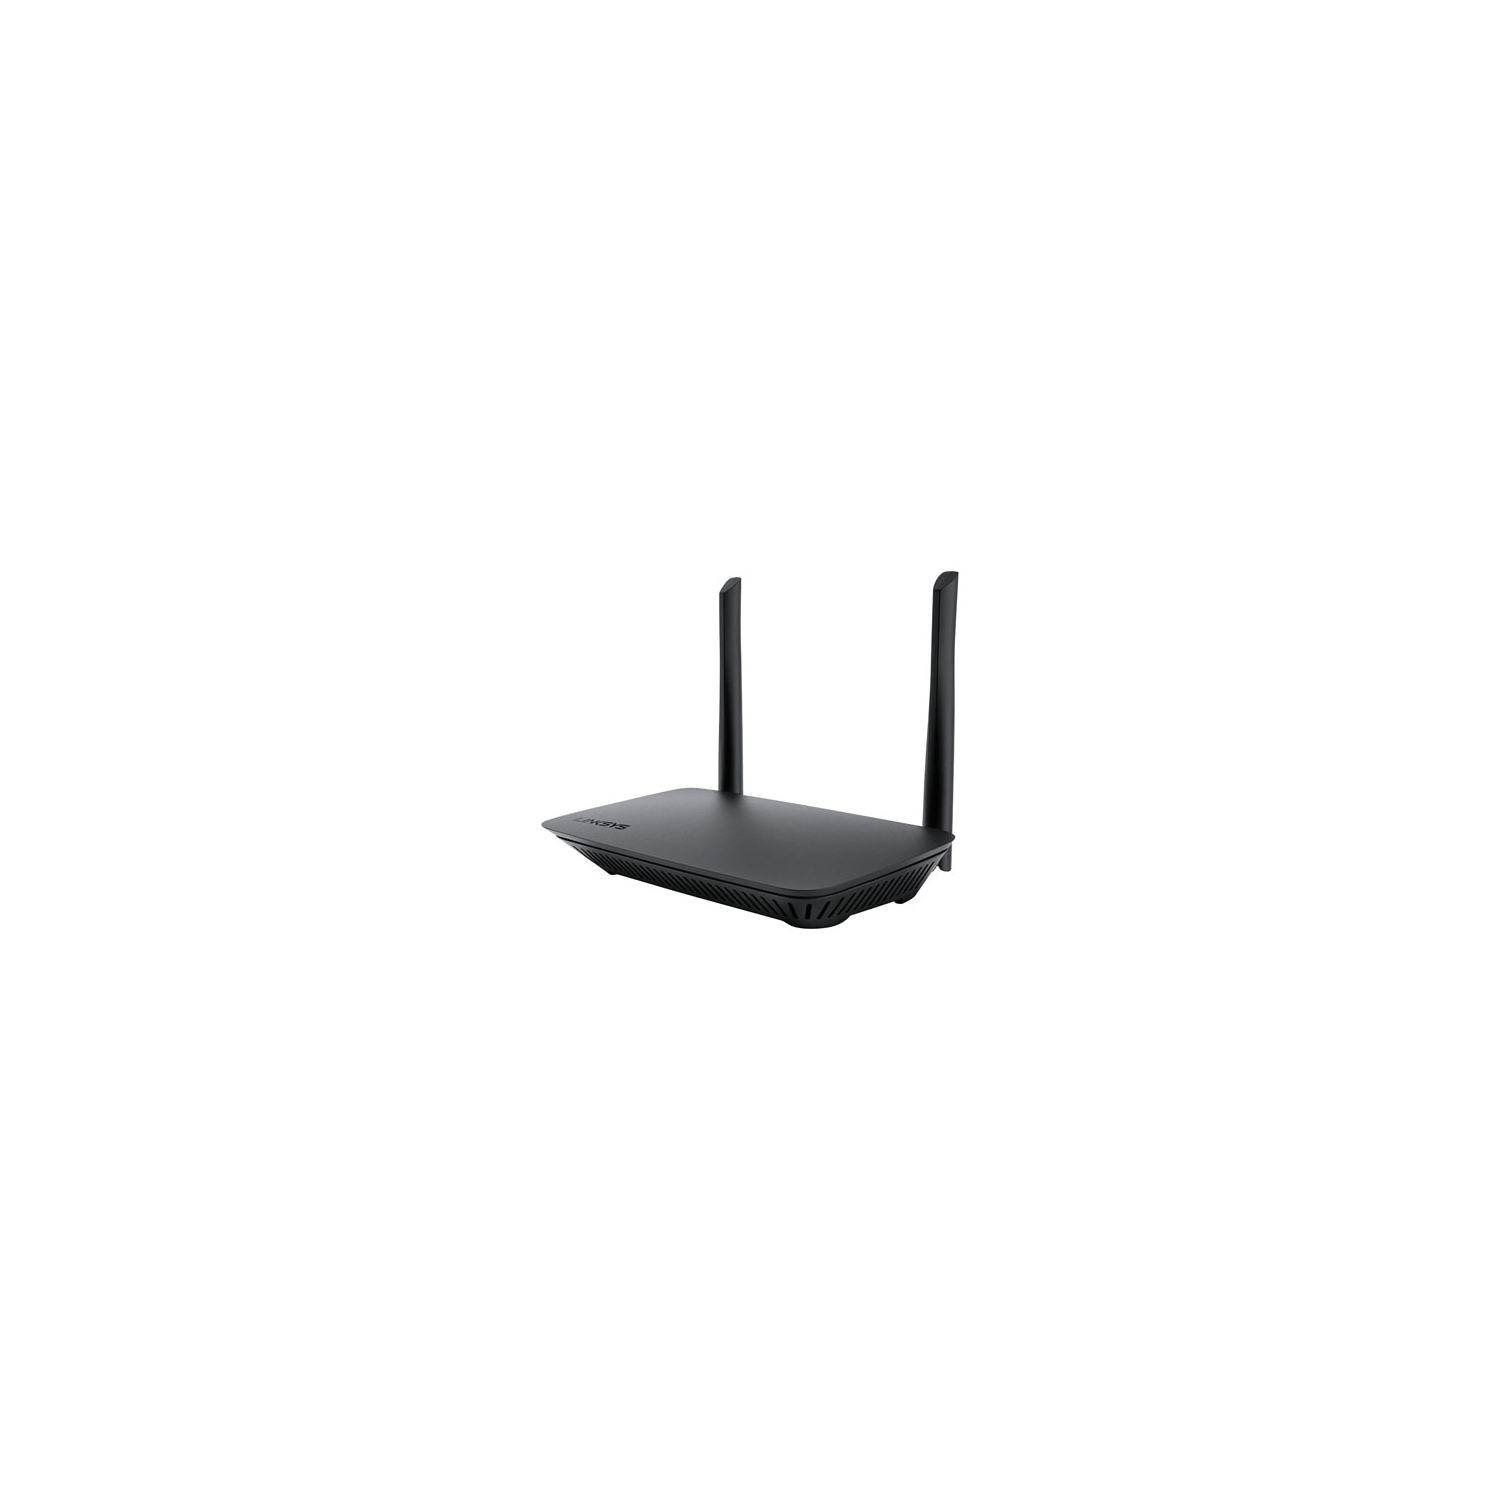 Linksys WiFi 5 Router Dual-Band AC1200 Black E5400 - Best Buy